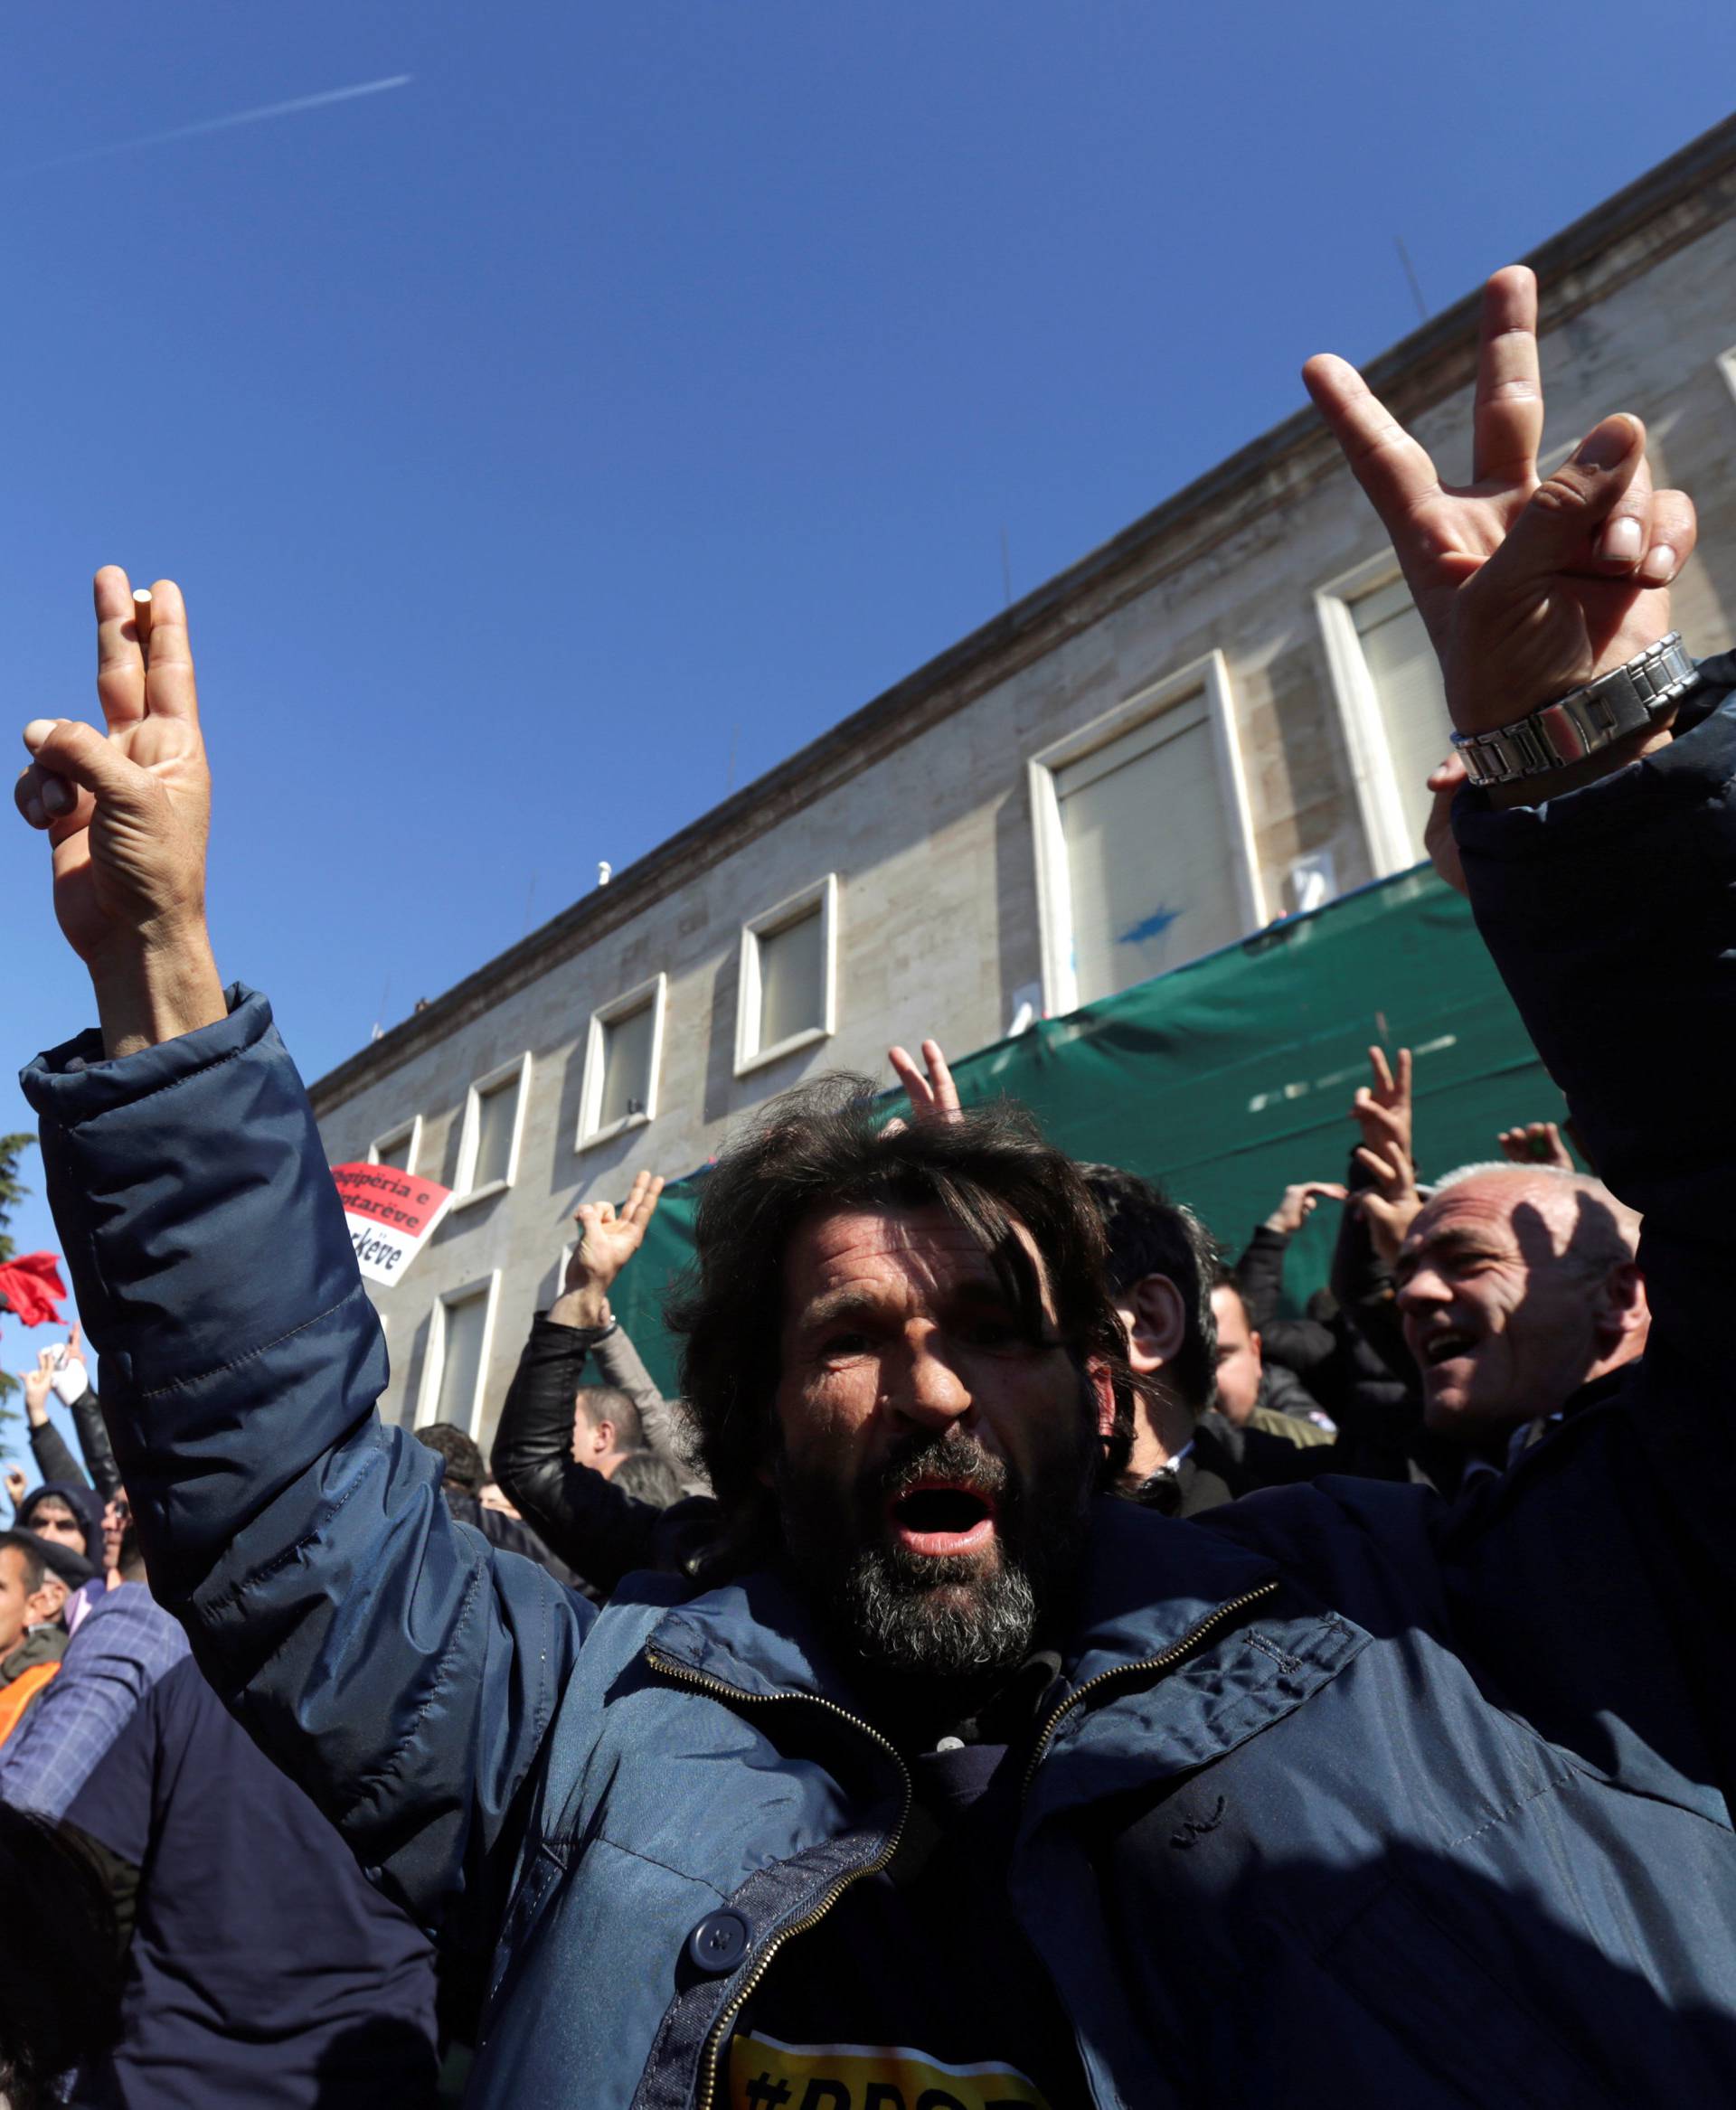 Supporters of the opposition party shout slogans during an anti-government protest in front of the office of Albanian Prime Minister Edi Rama in Tirana